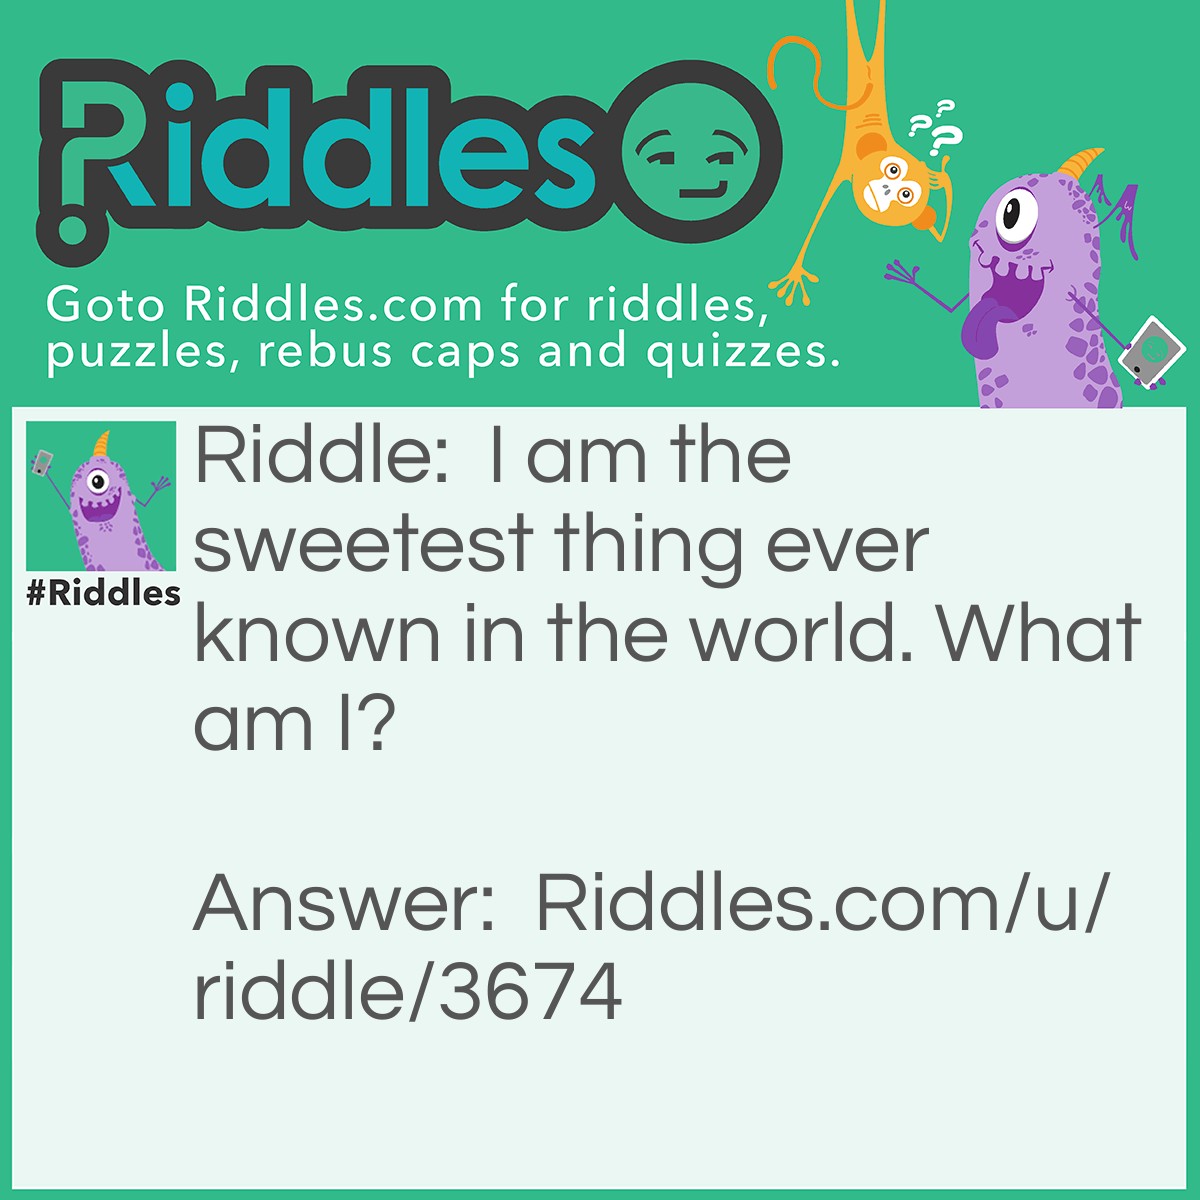 Riddle: I am the sweetest thing ever known in the world. What am I? Answer: Sex.